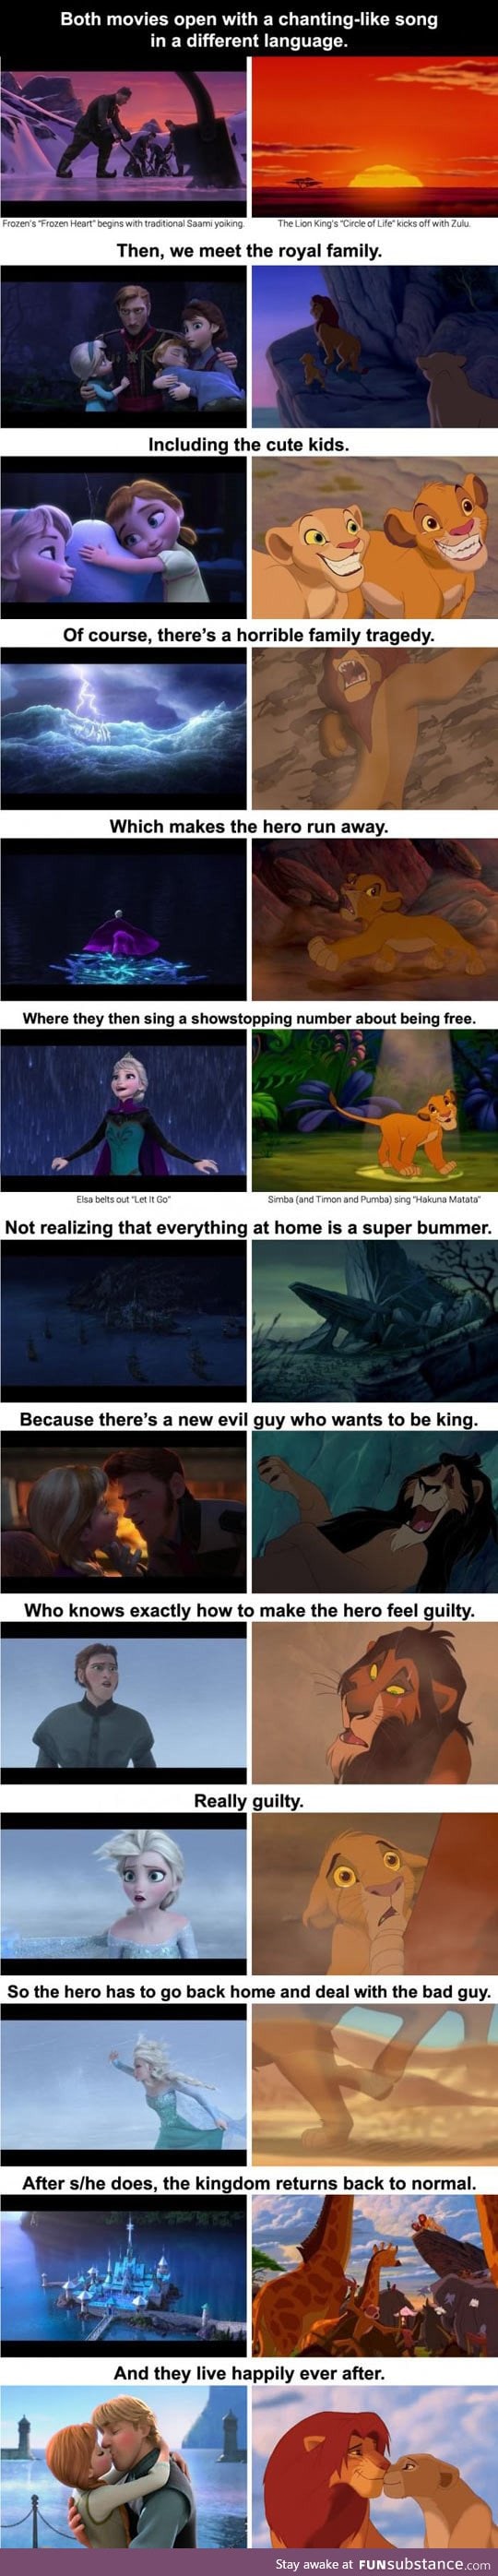 Apparently frozen and the lion king are the same movie